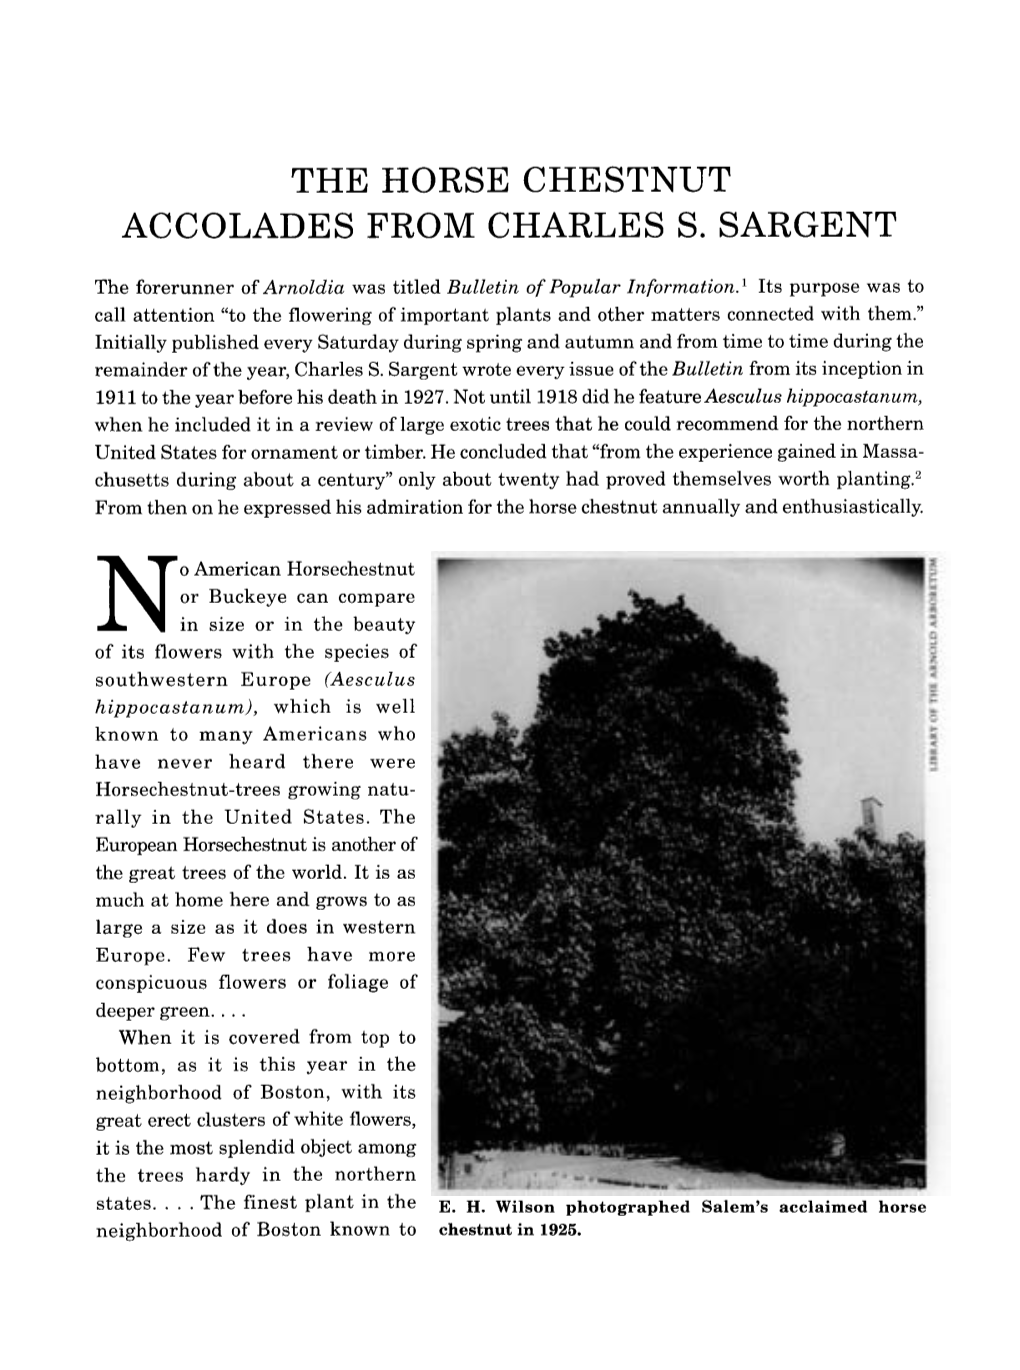 The Horse Chestnut: Accolades from Charles S. Sargent